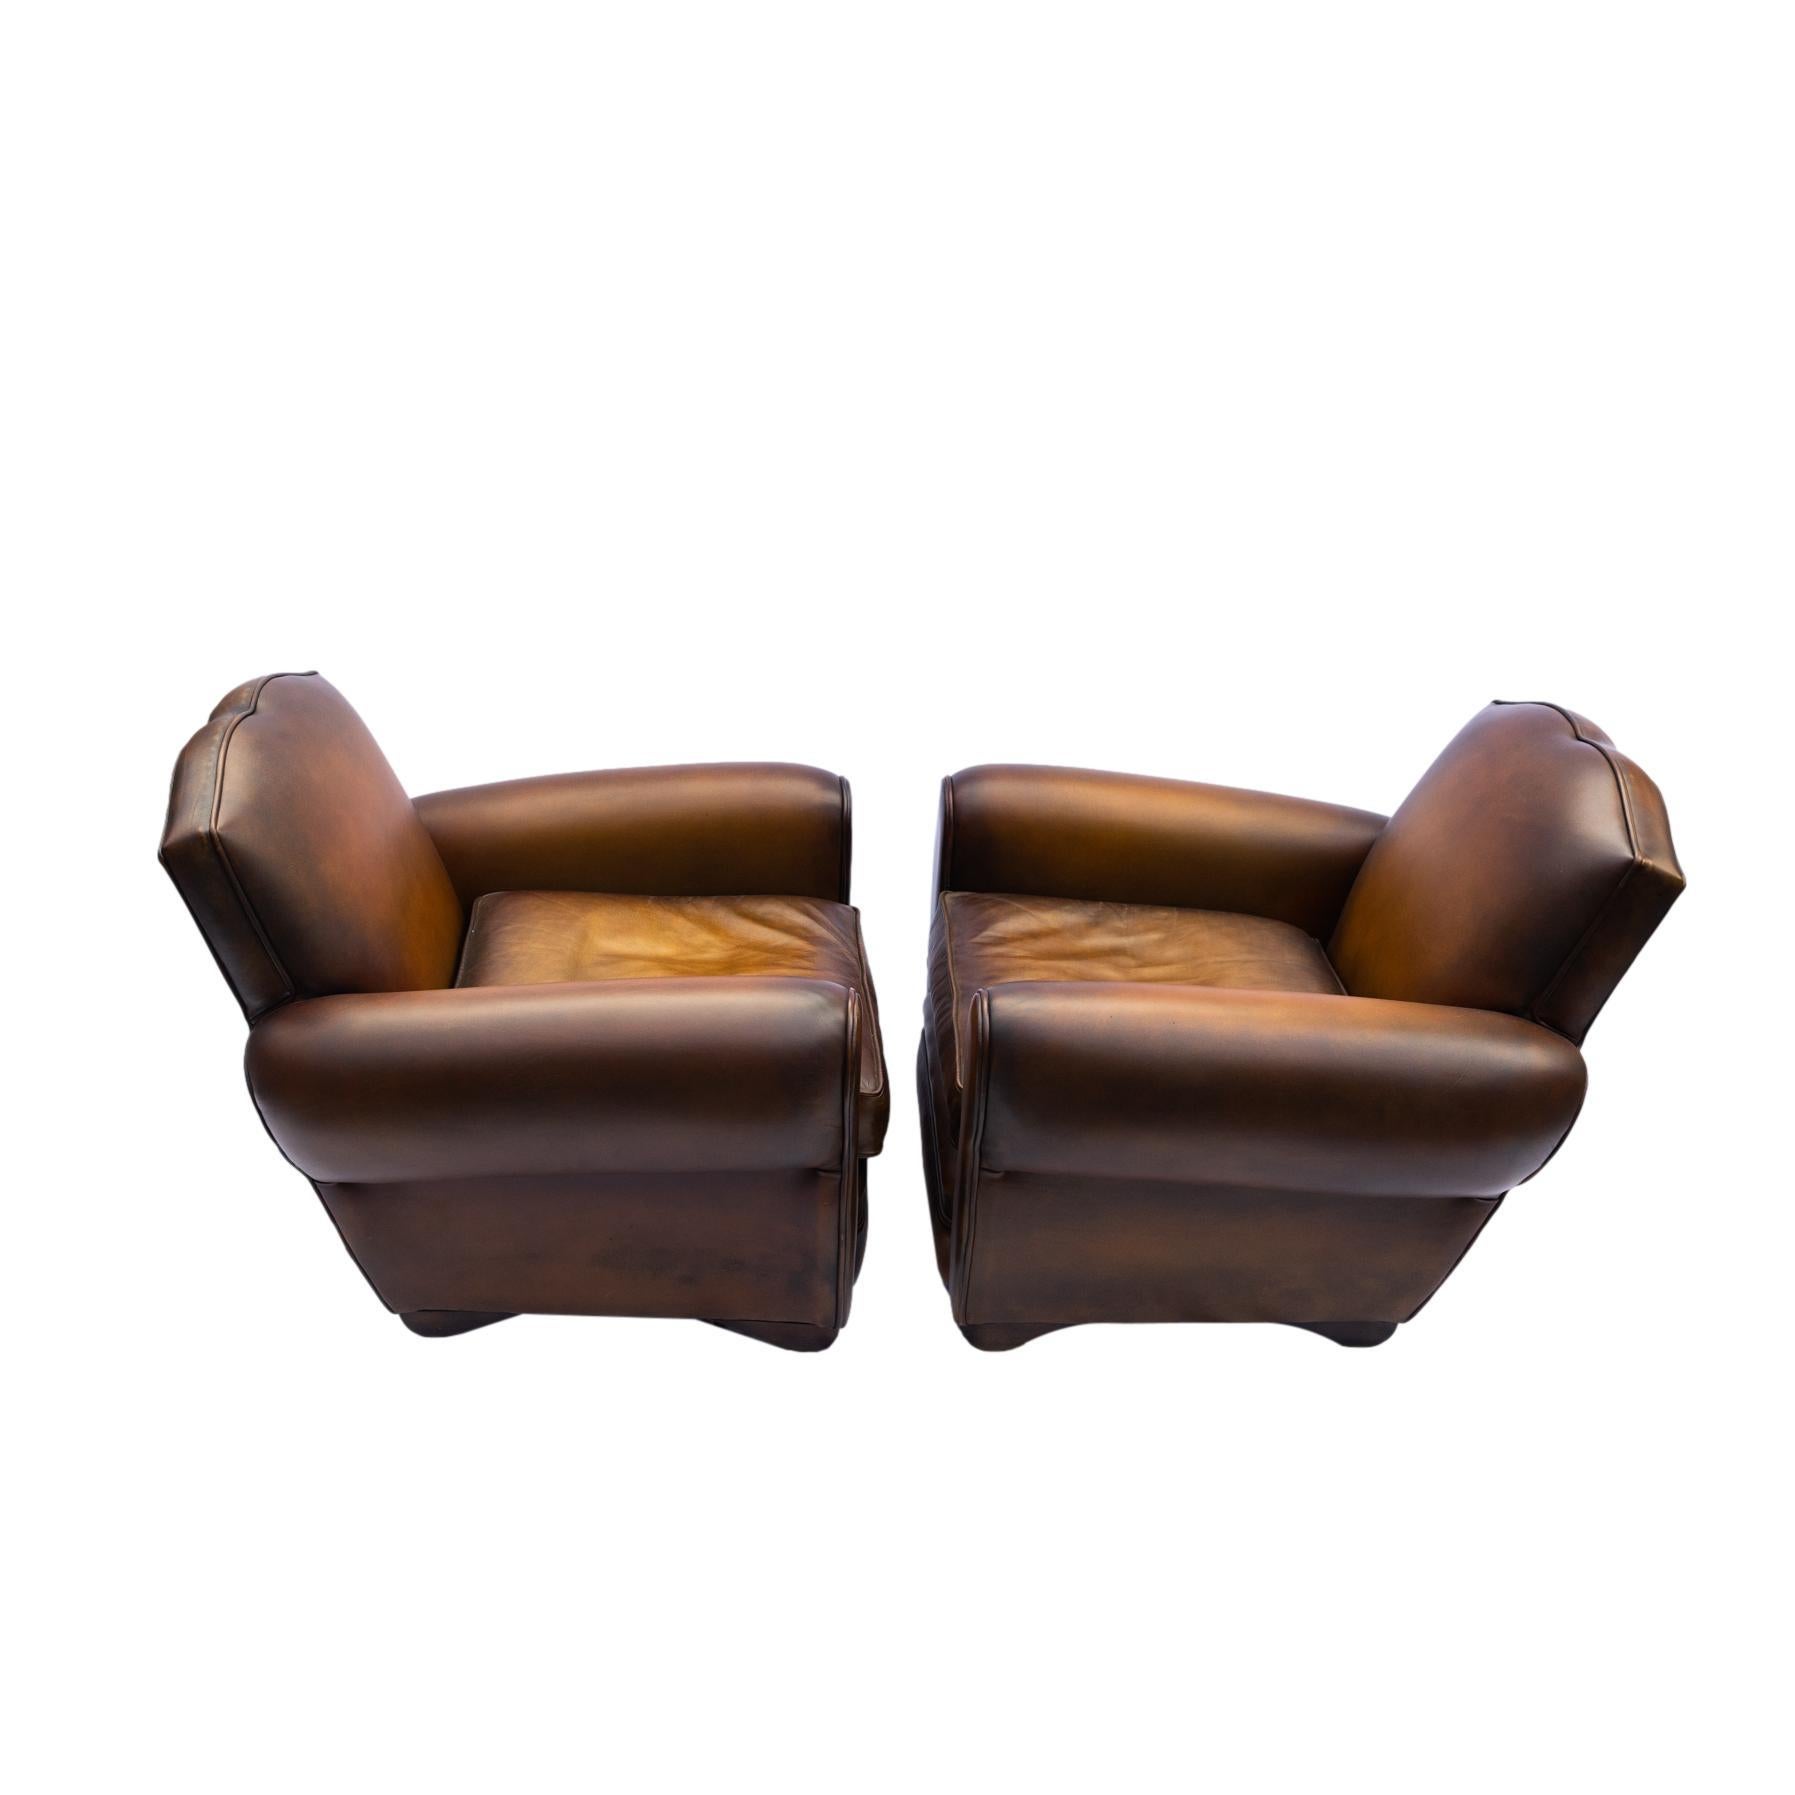 A Pair of Art Deco leather club chairs of Streamlined Modern Form, with rolled arms and arched sides, trimmed with leather welt cord, the mustache-shaped backs trimmed with nailheads, the decking detailed with thick leather piping, on oak block